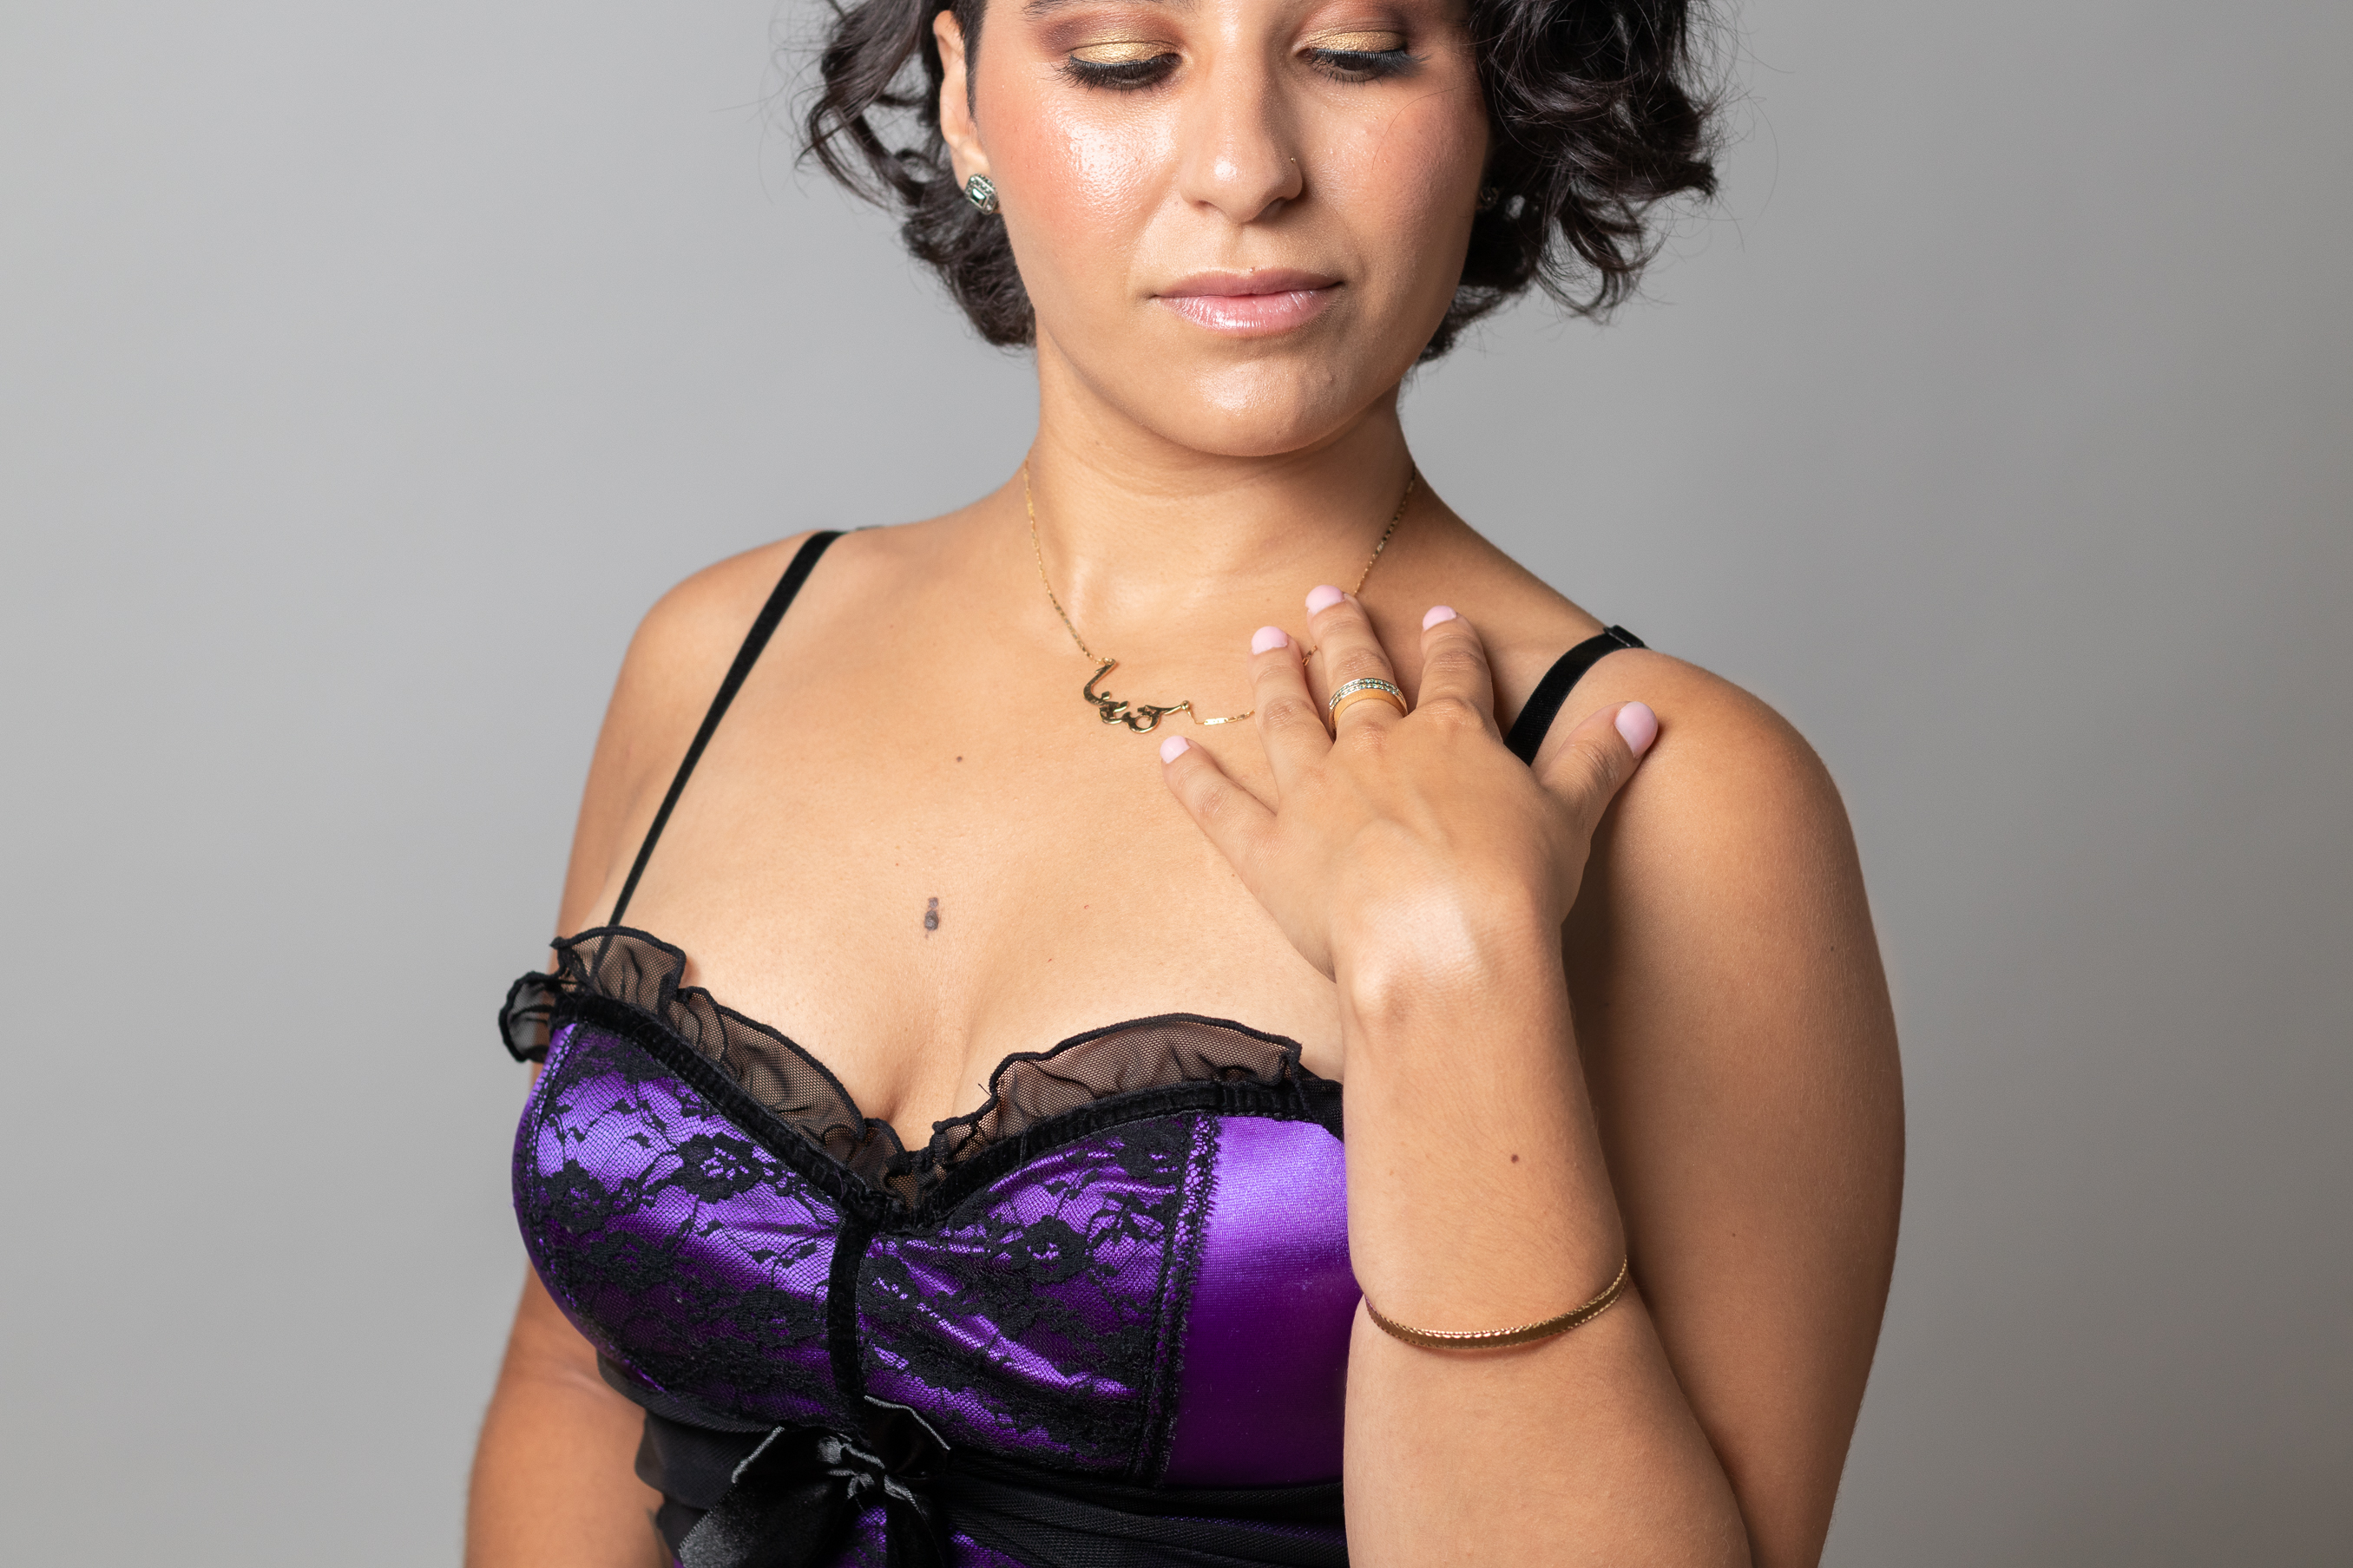 Black-haired woman in a purple bustier looking down.